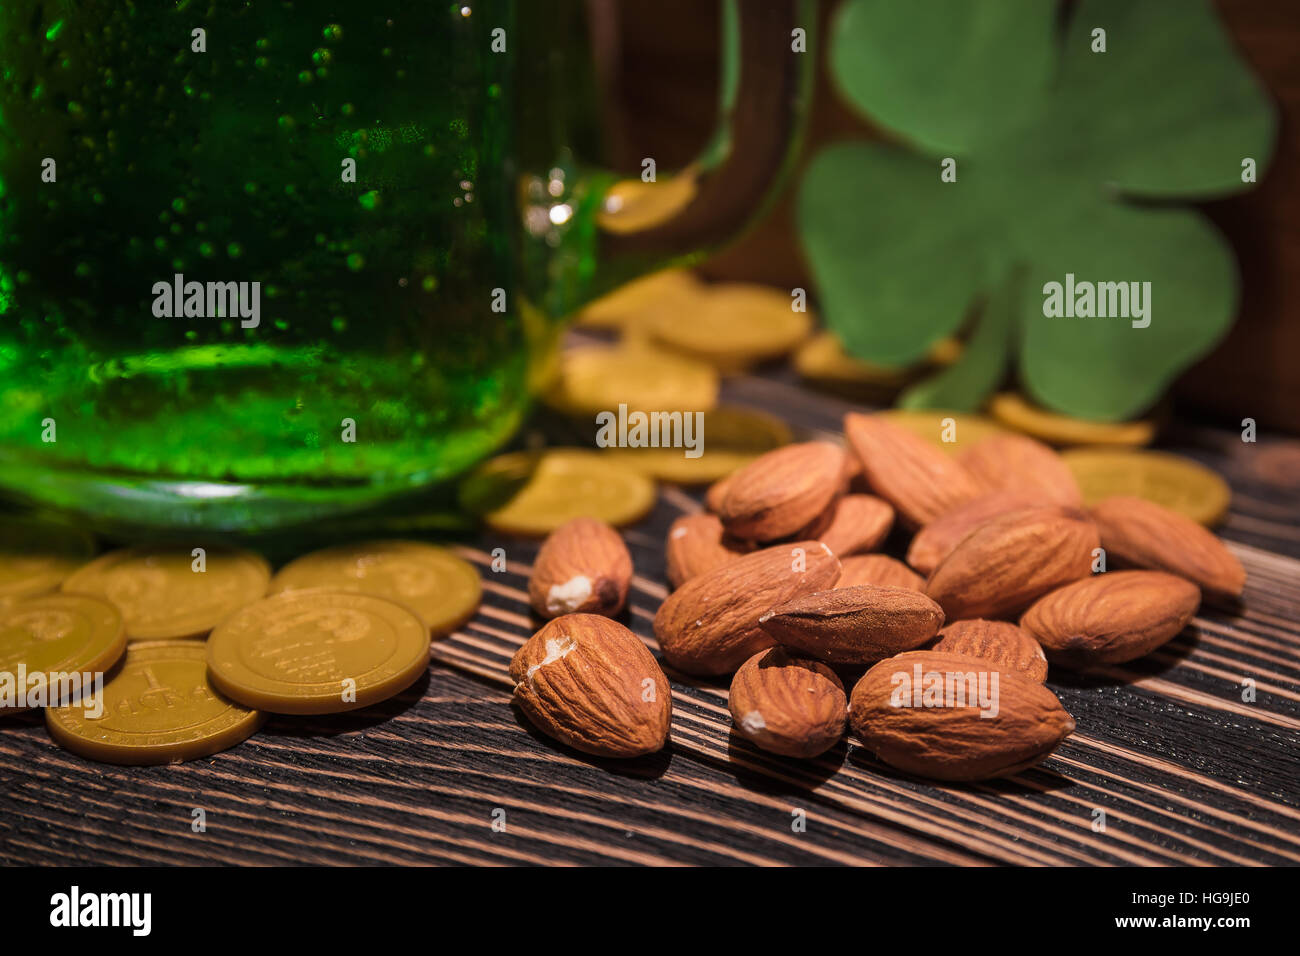 St Patrick's day green beer nuts Stock Photo